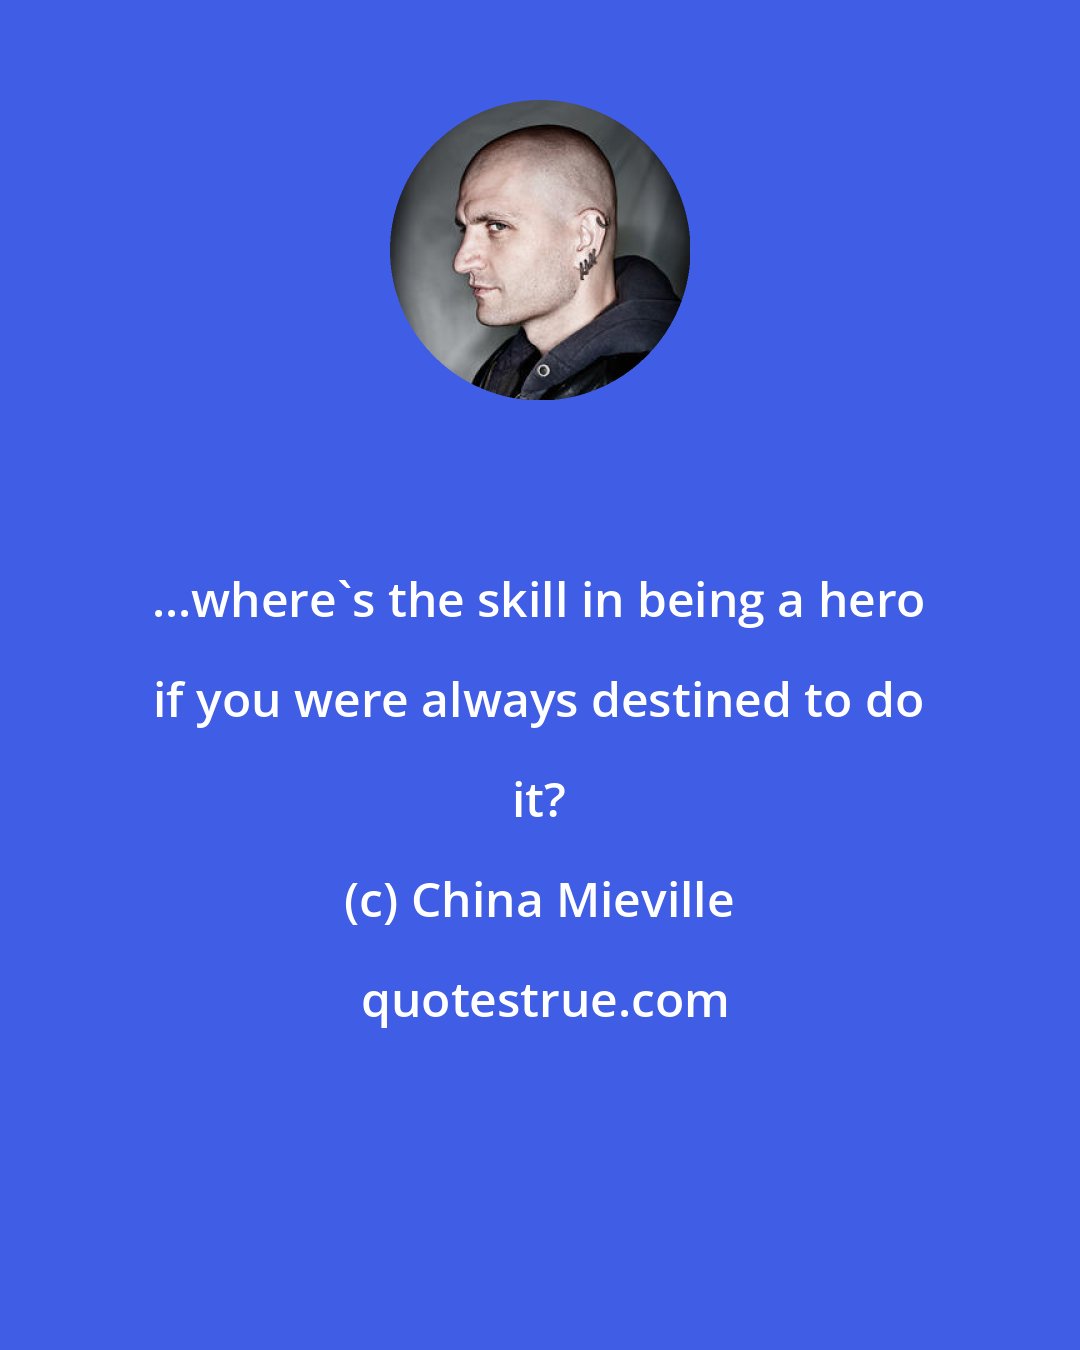 China Mieville: ...where's the skill in being a hero if you were always destined to do it?